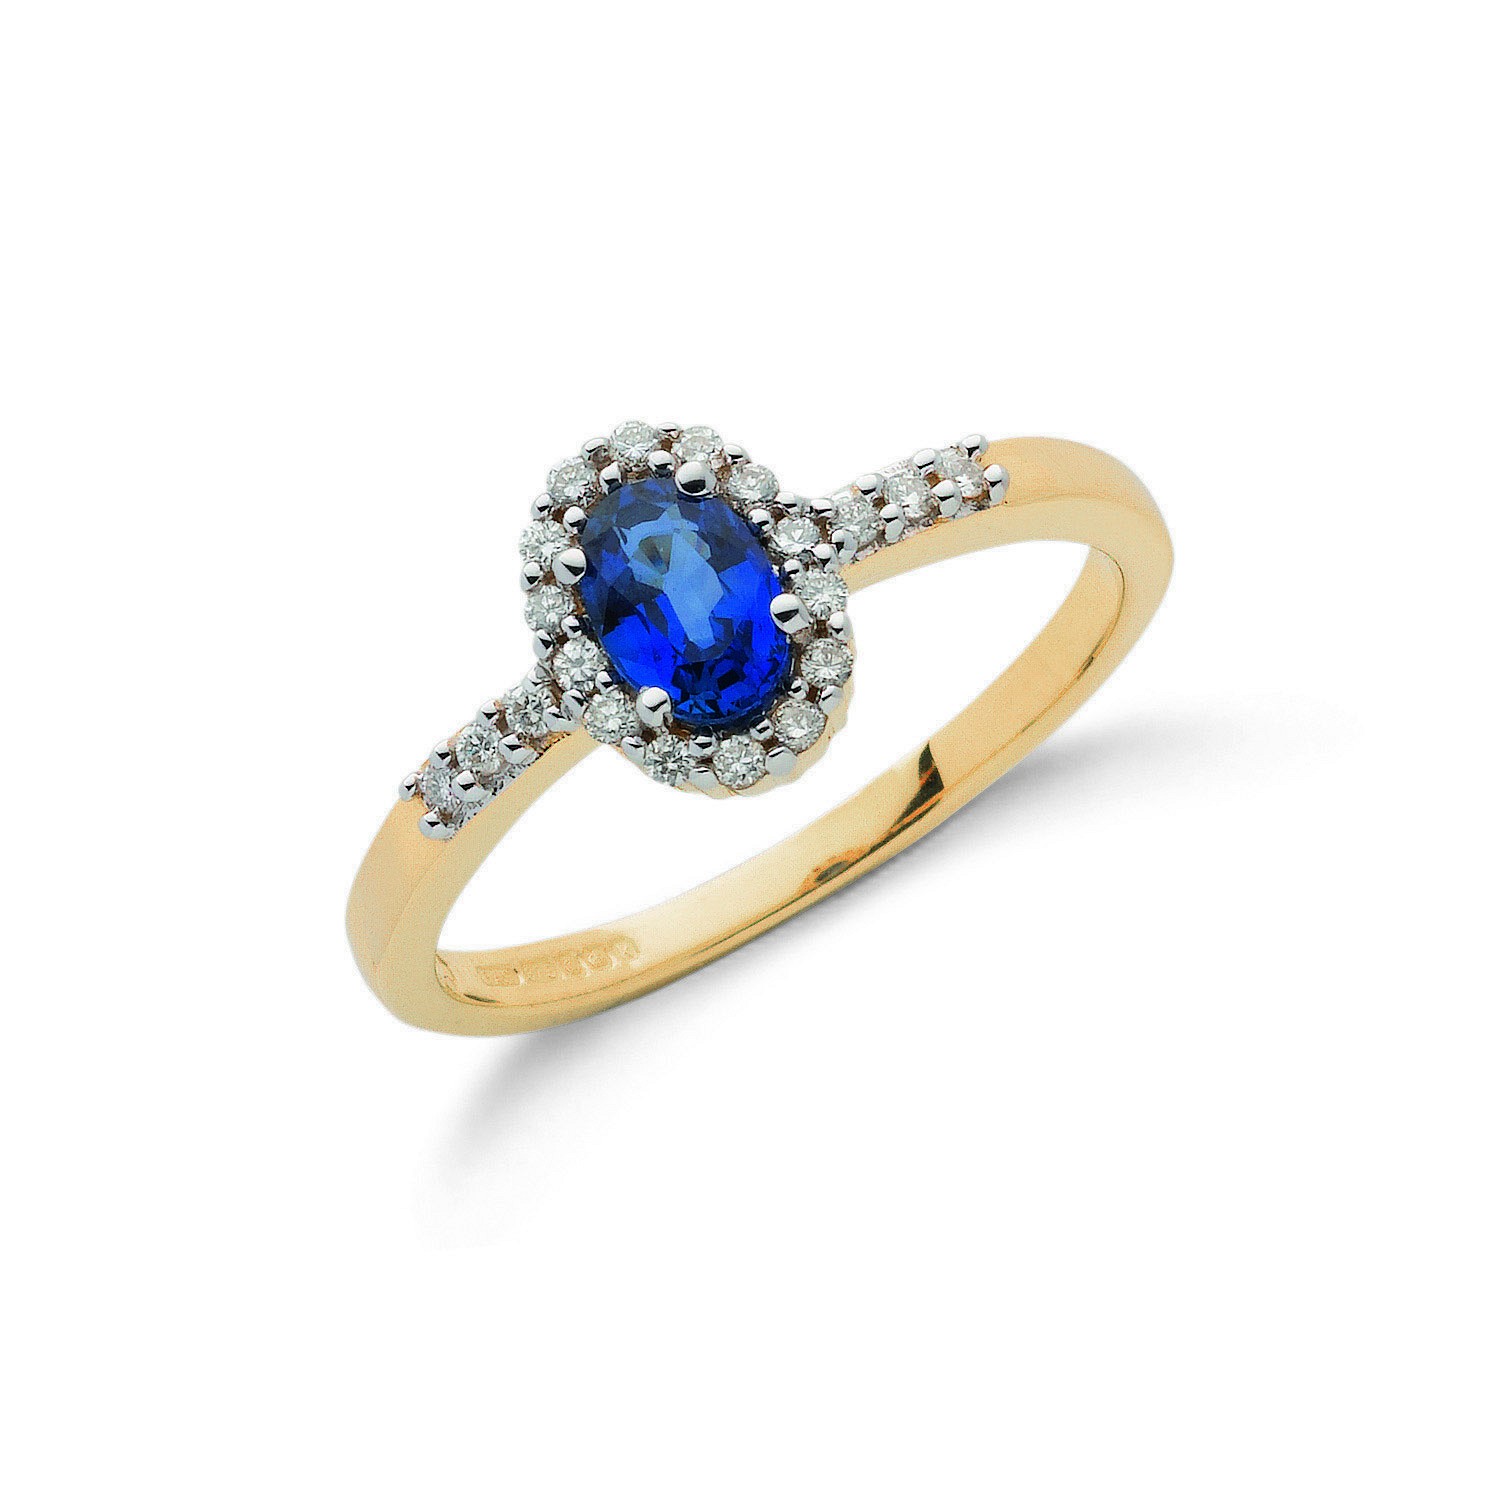 1.00 Carat Beautiful Oval Shaped Sapphire Cluster Ring